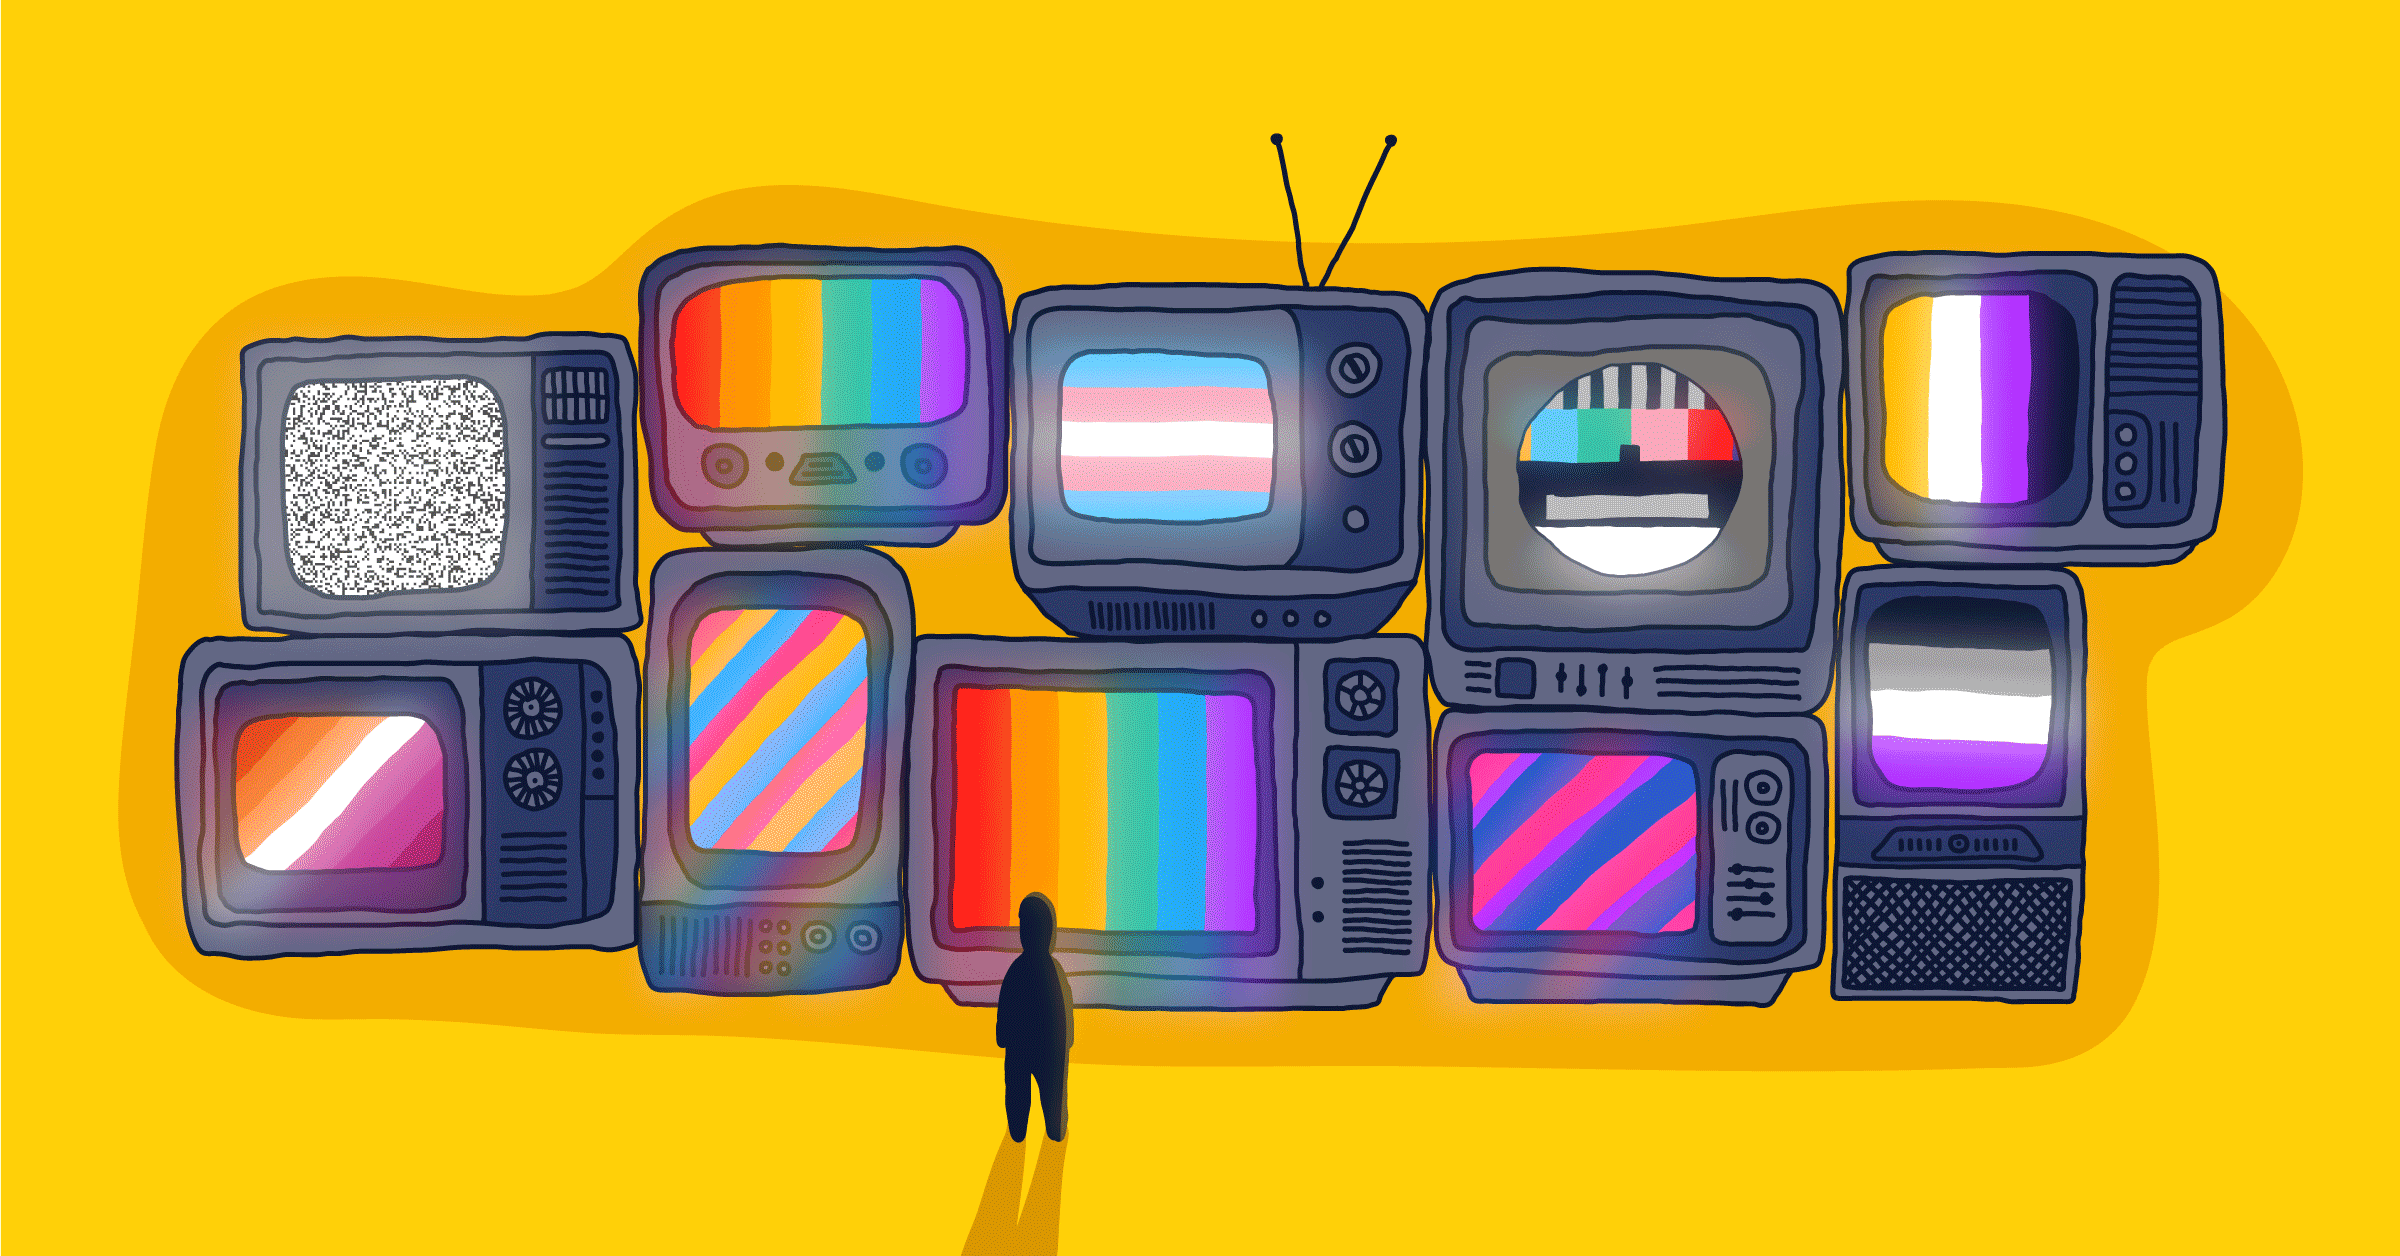 Animated shows are leading the way for LGBTQ+ representation—but will that  continue?